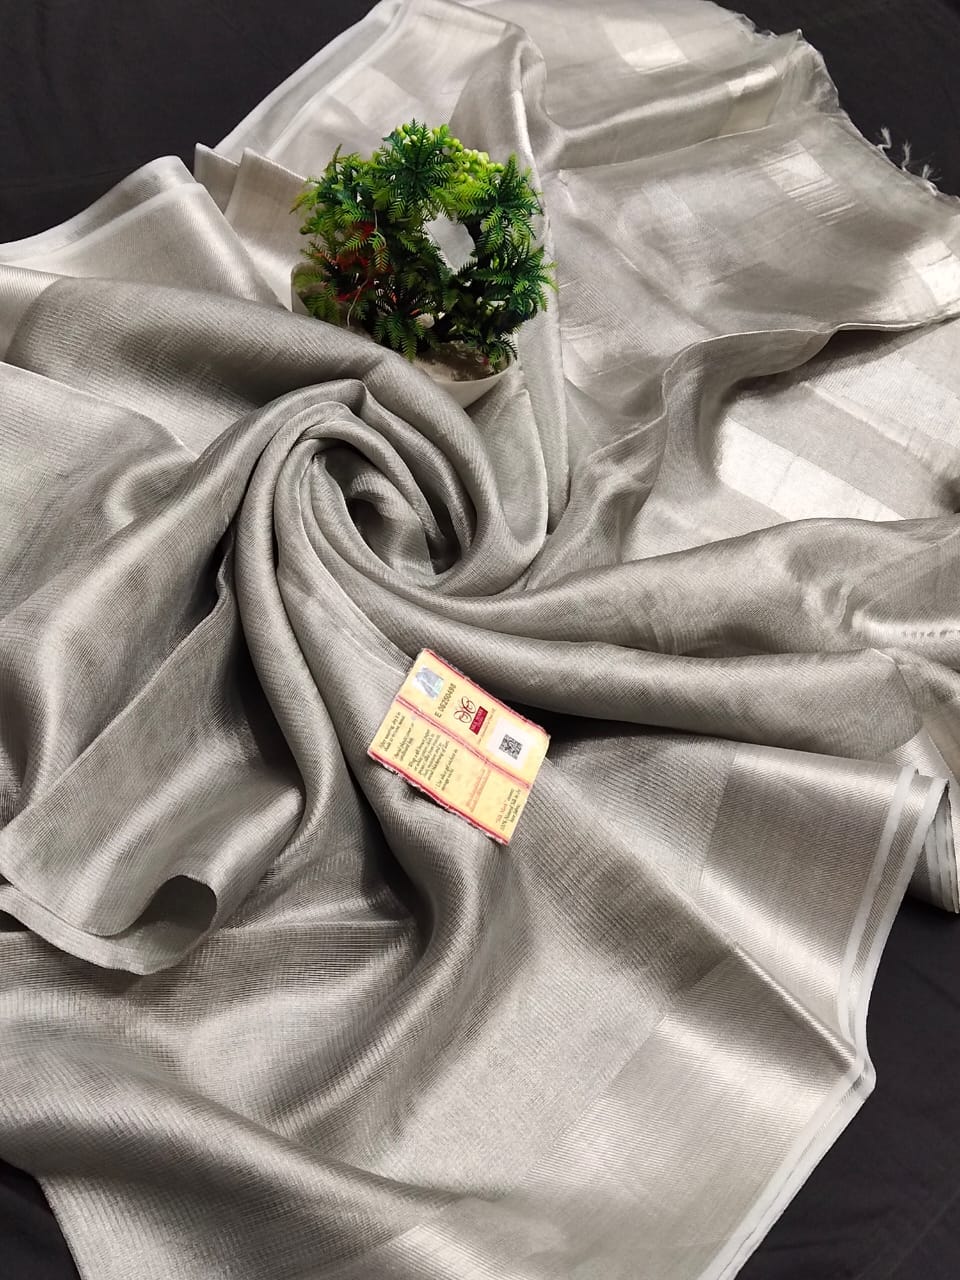 Tissue Linen Silver Handloom Saree with Blouse